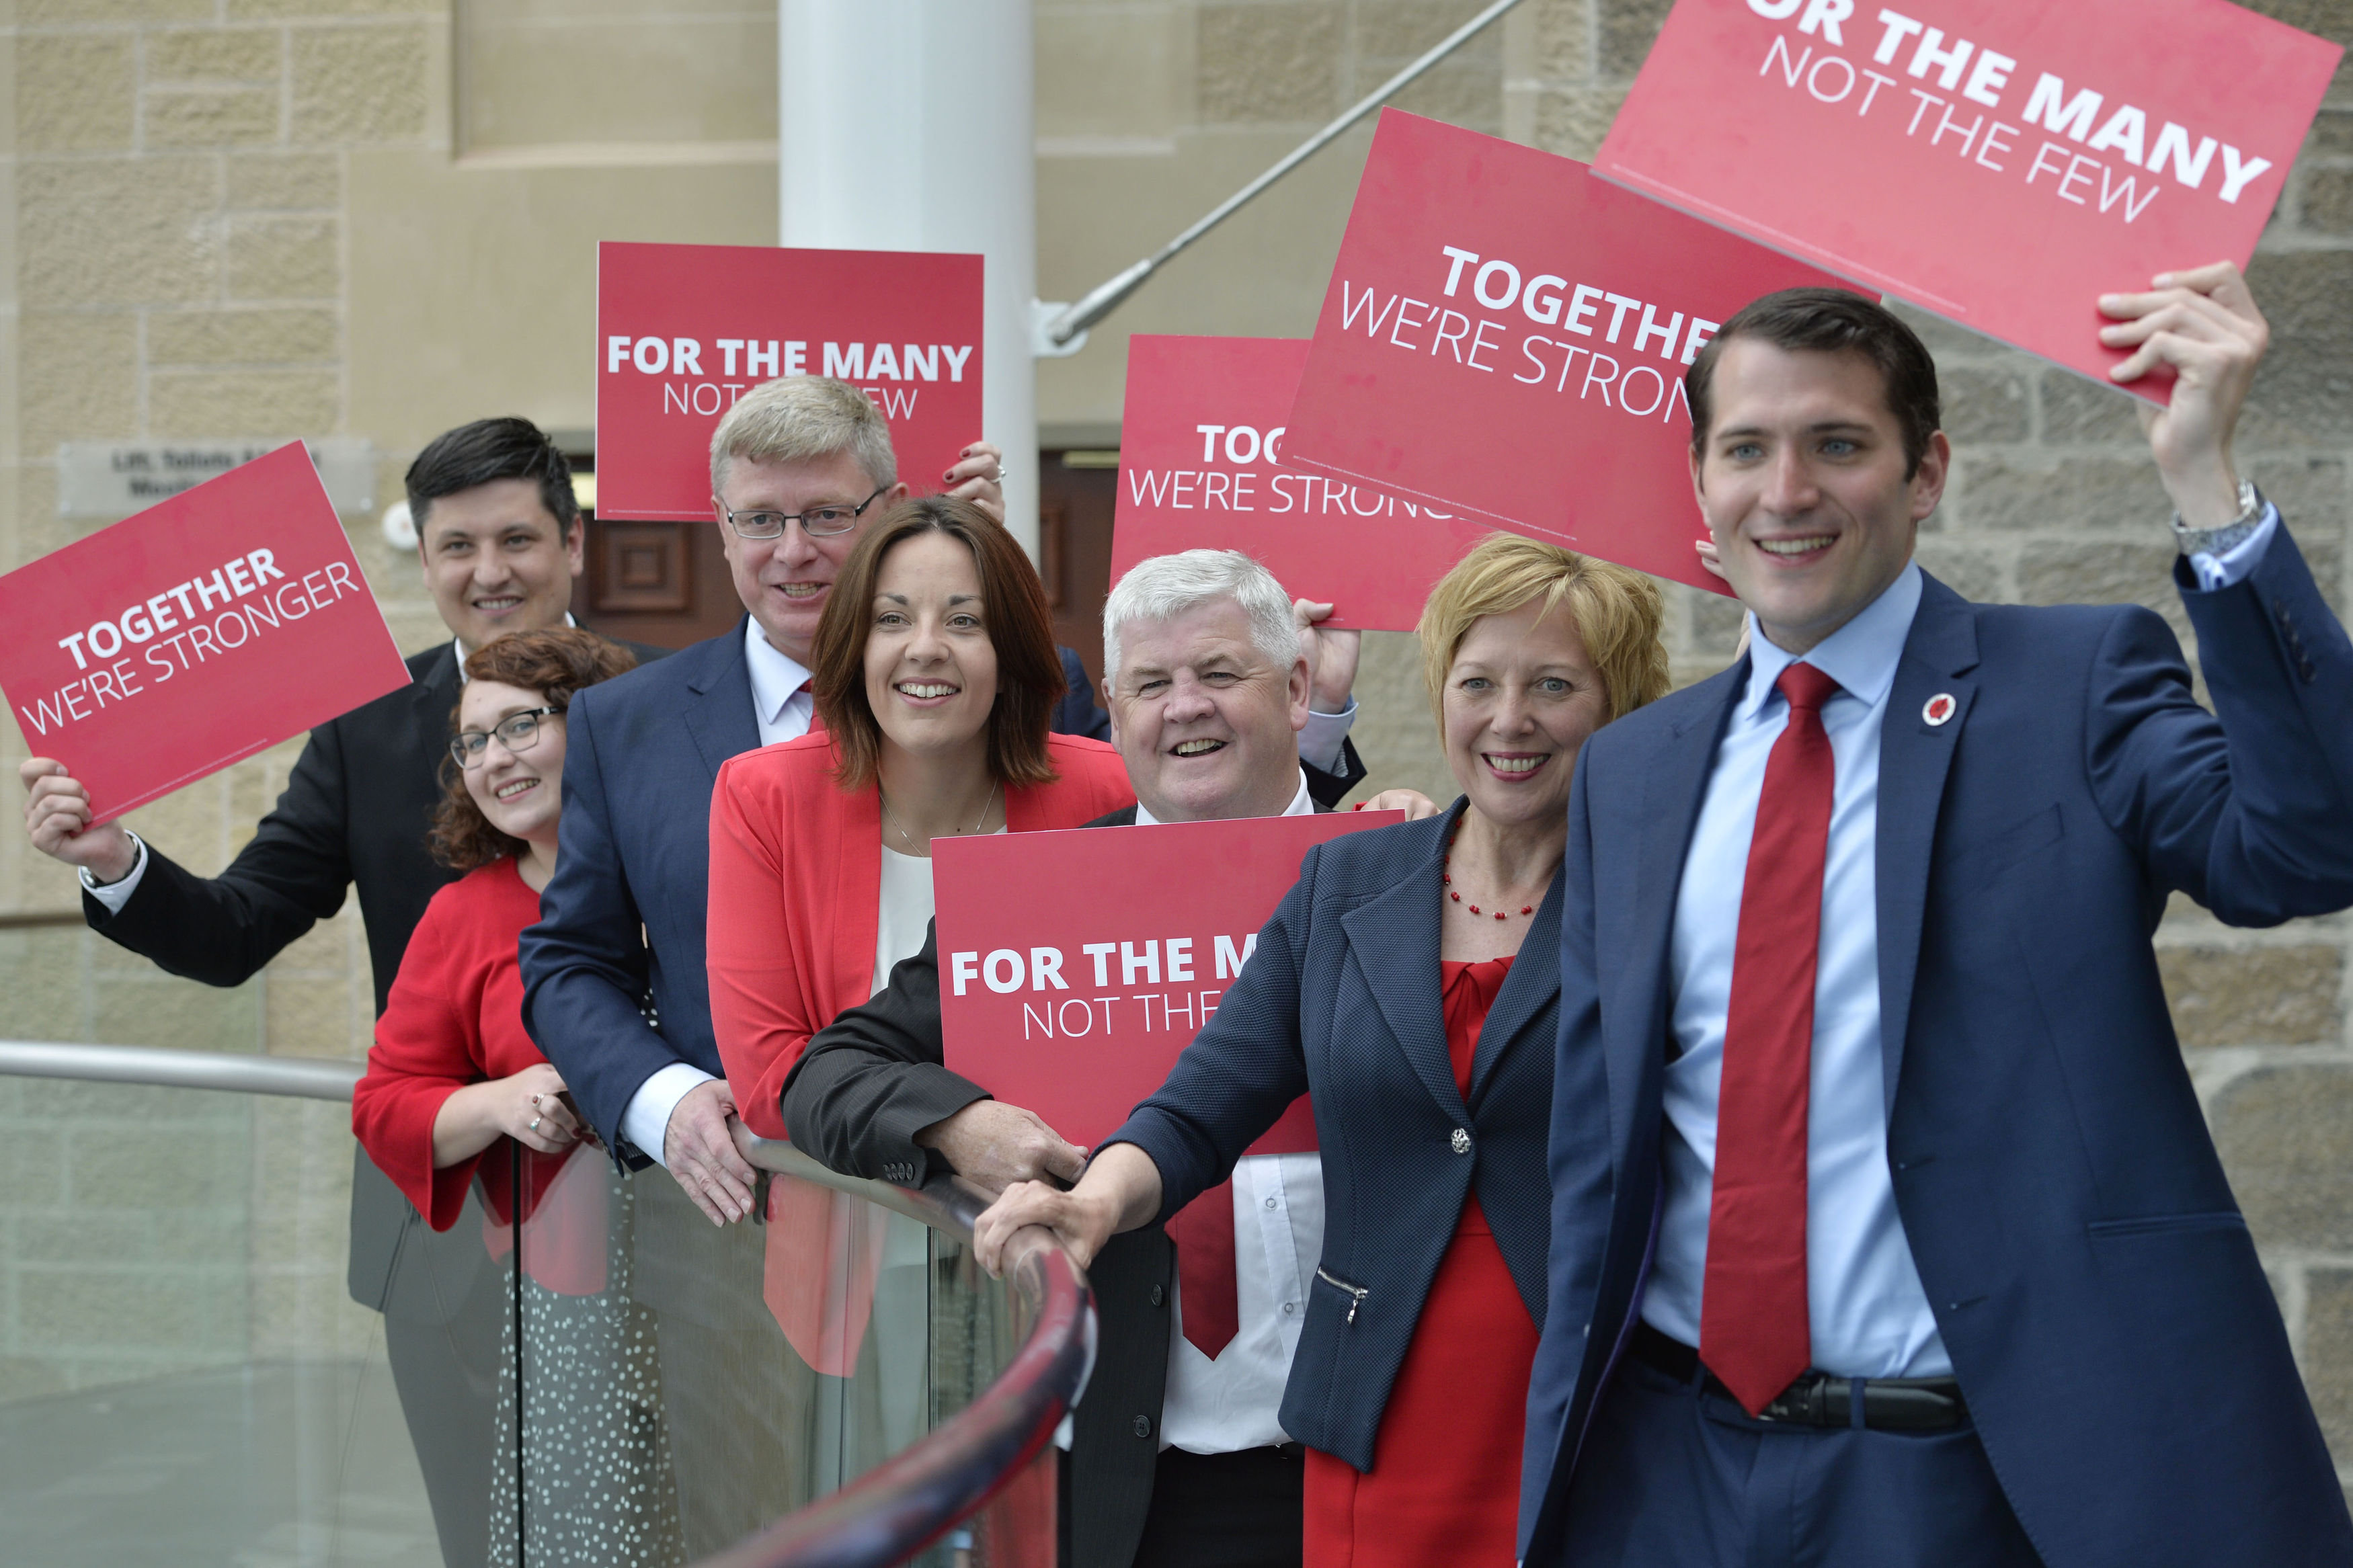 <strong>Scottish Labour MPs (l-r) Ged Killen, Danielle Rowley, Martin Whitfield, the then Scottish Labour leader Kezia Dugdale, Hugh Gaffney, Lesley Laird, Paul Sweeney</strong>